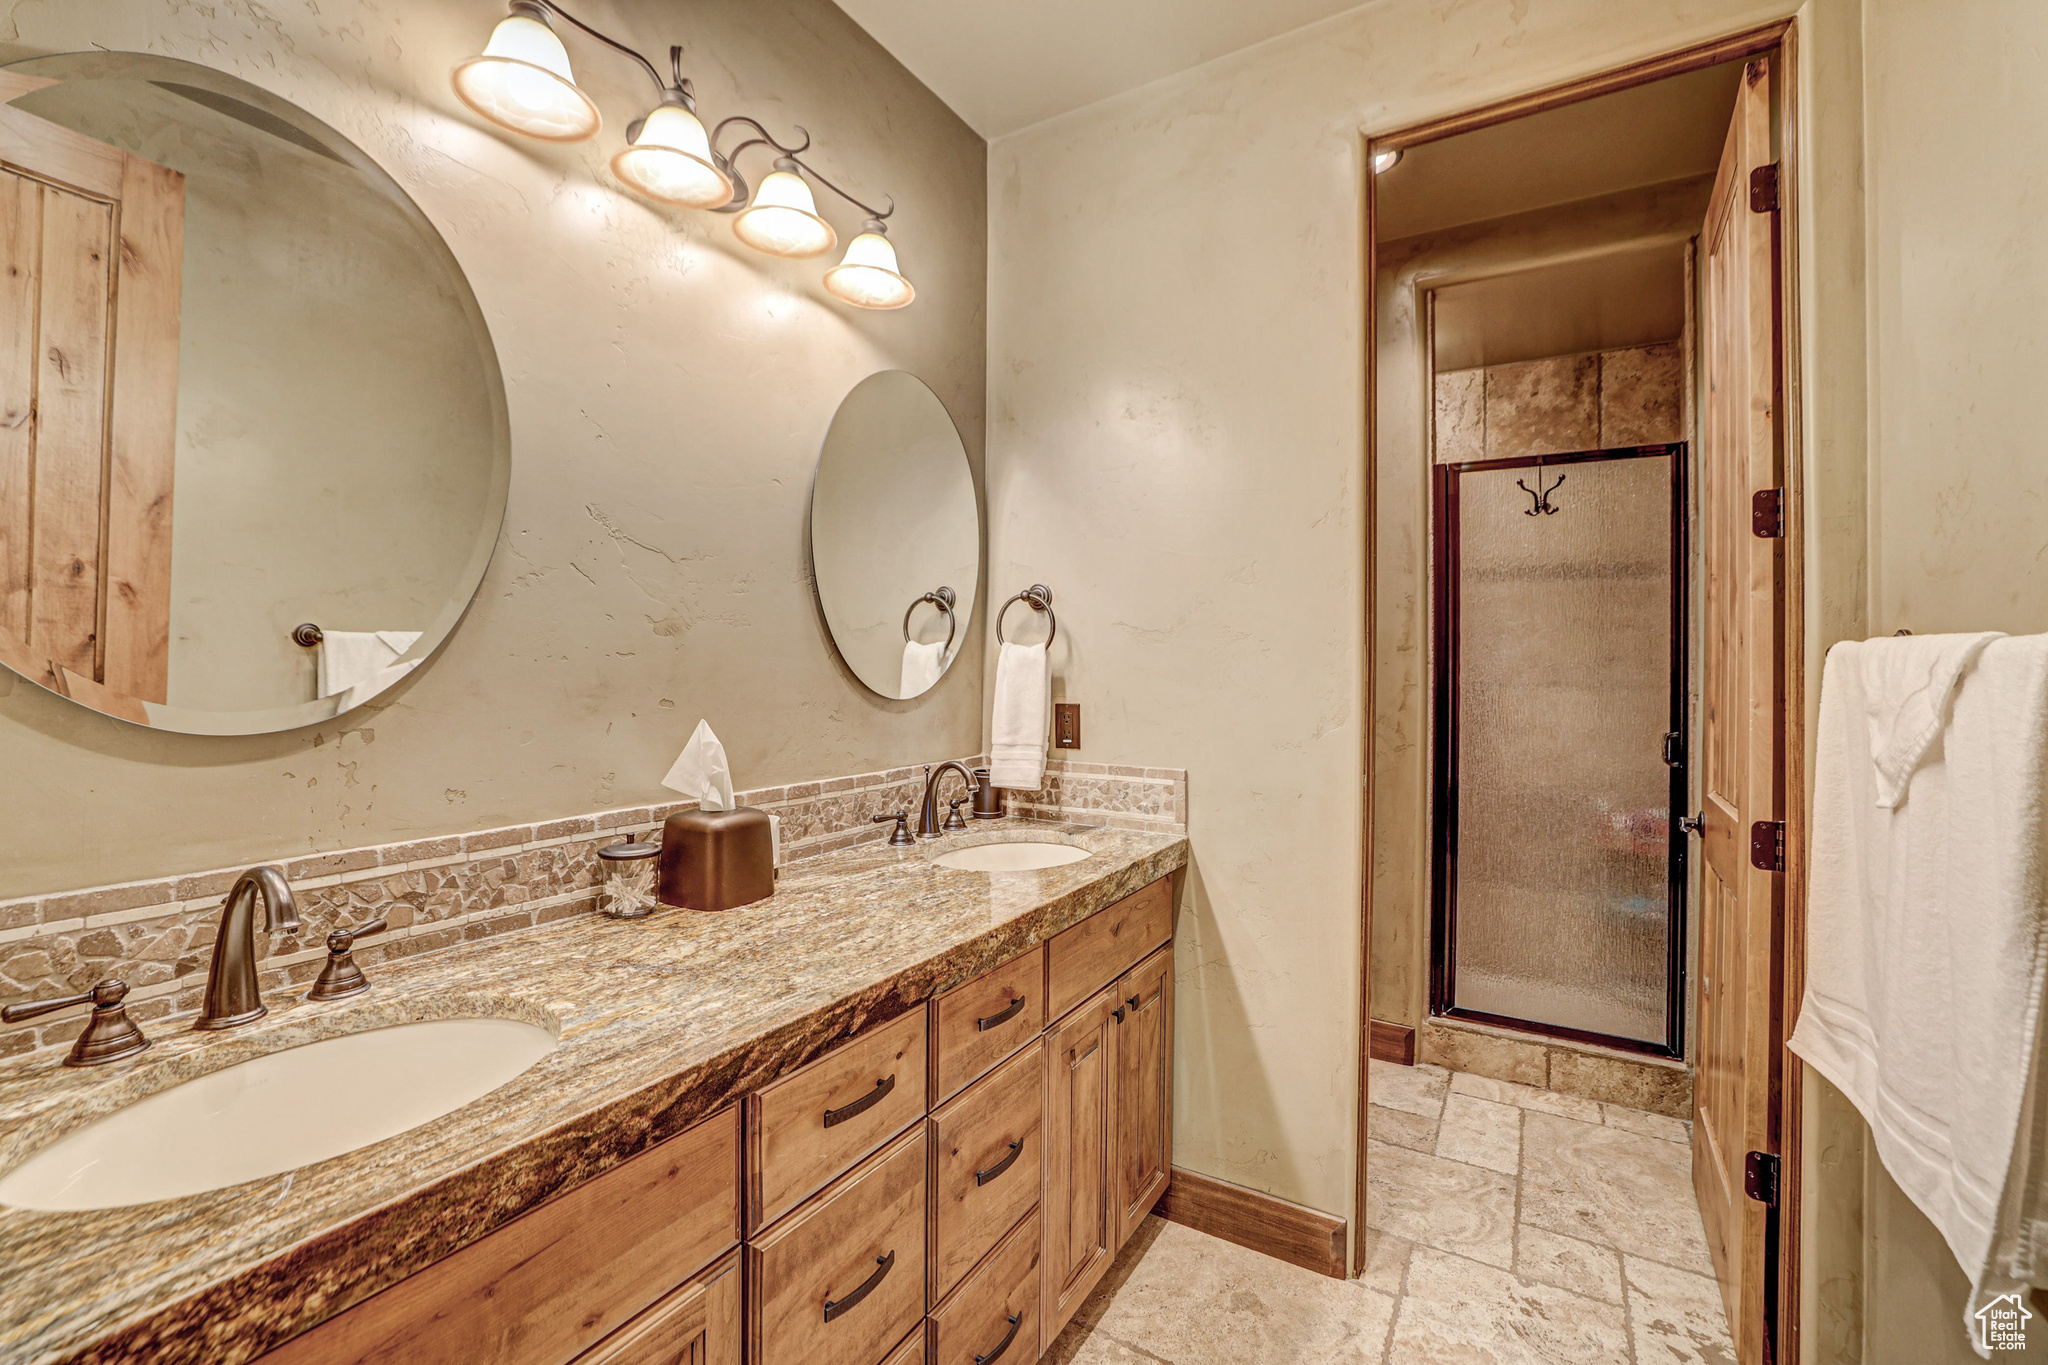 Bathroom with dual sinks, backsplash, vanity with extensive cabinet space, an enclosed shower, and tile floors